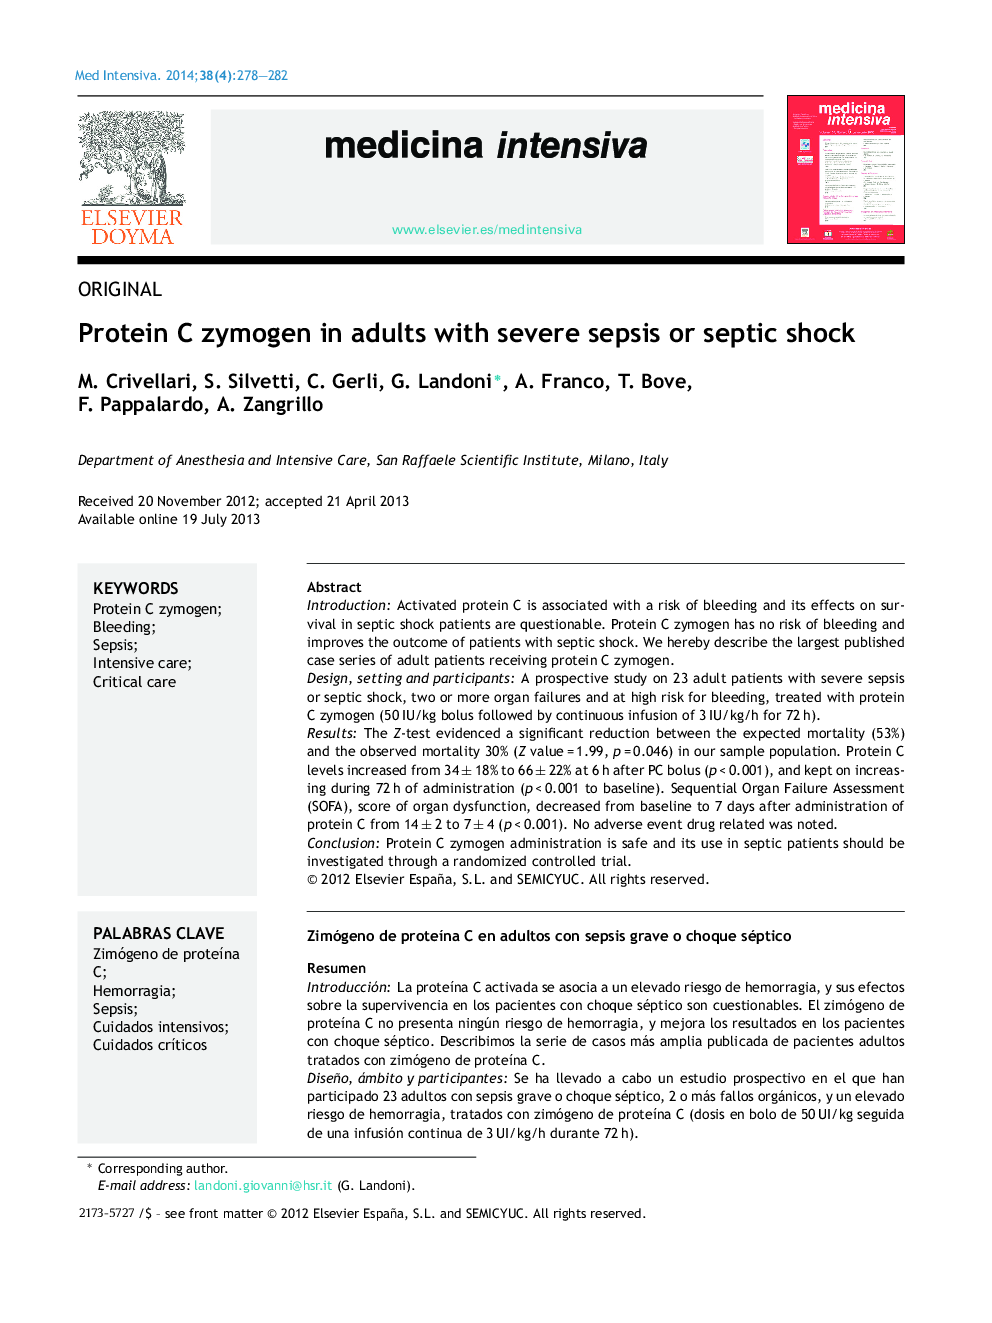 Protein C zymogen in adults with severe sepsis or septic shock